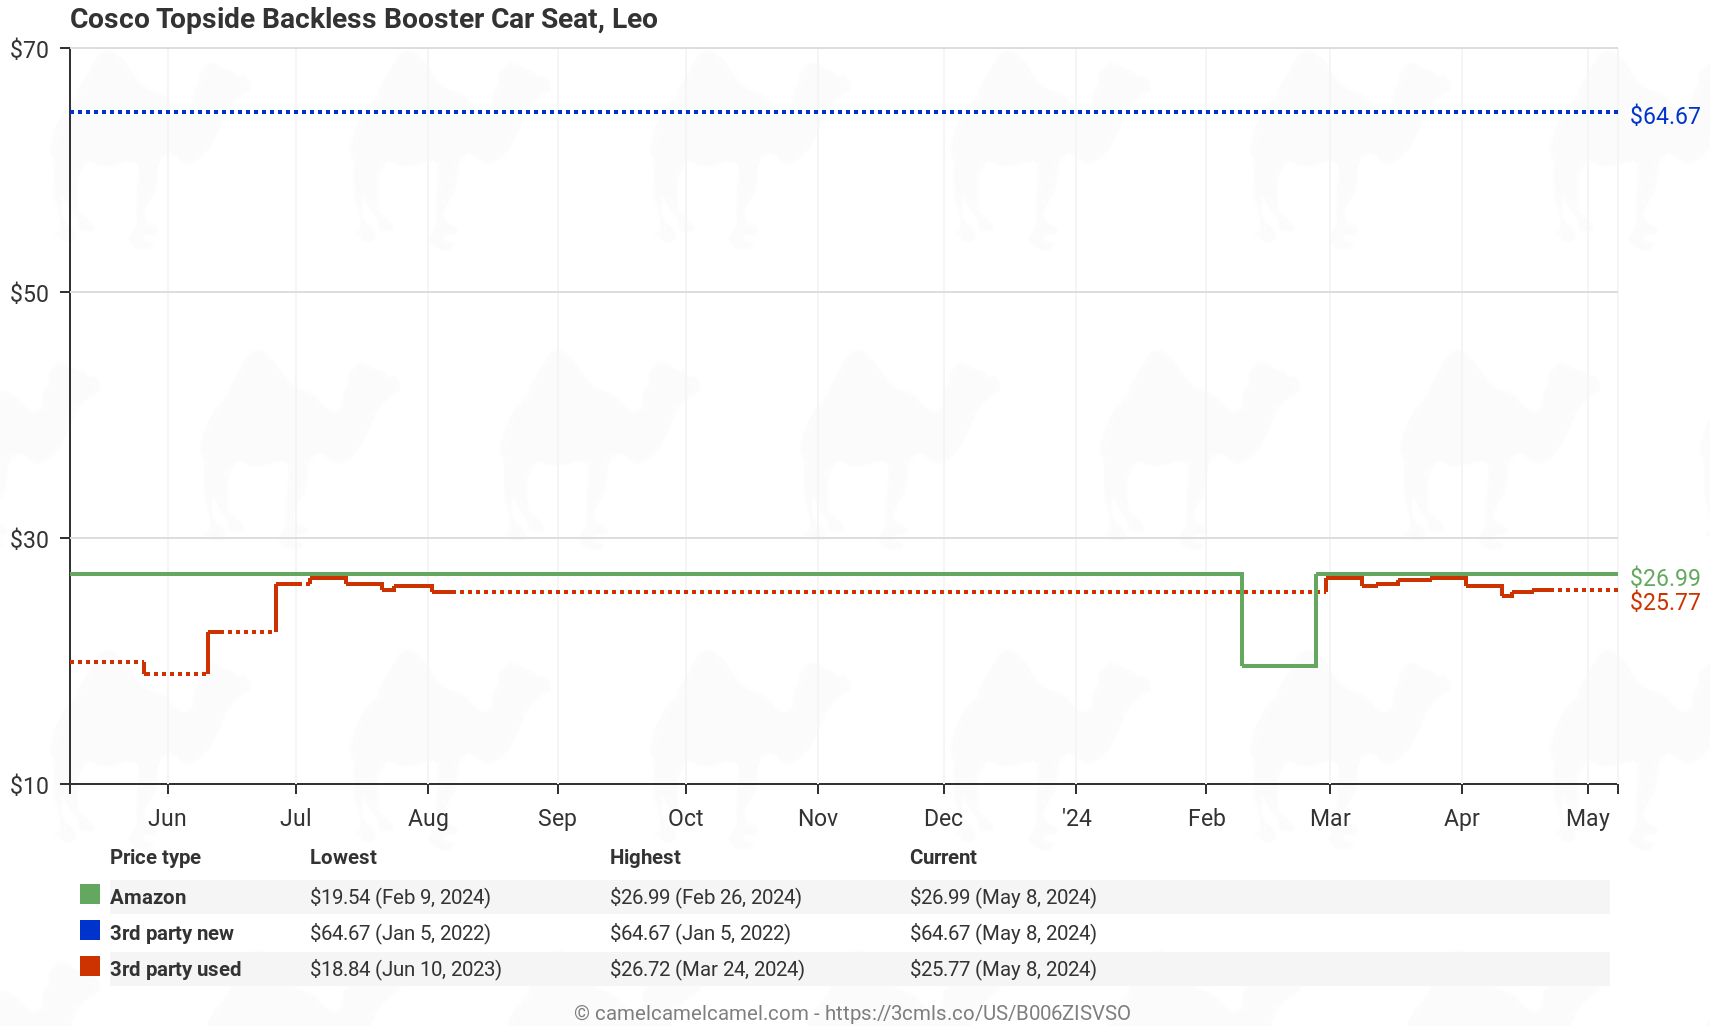 Cosco Topside Backless Booster Car Seat (Leo) - Price History: B006ZISVSO